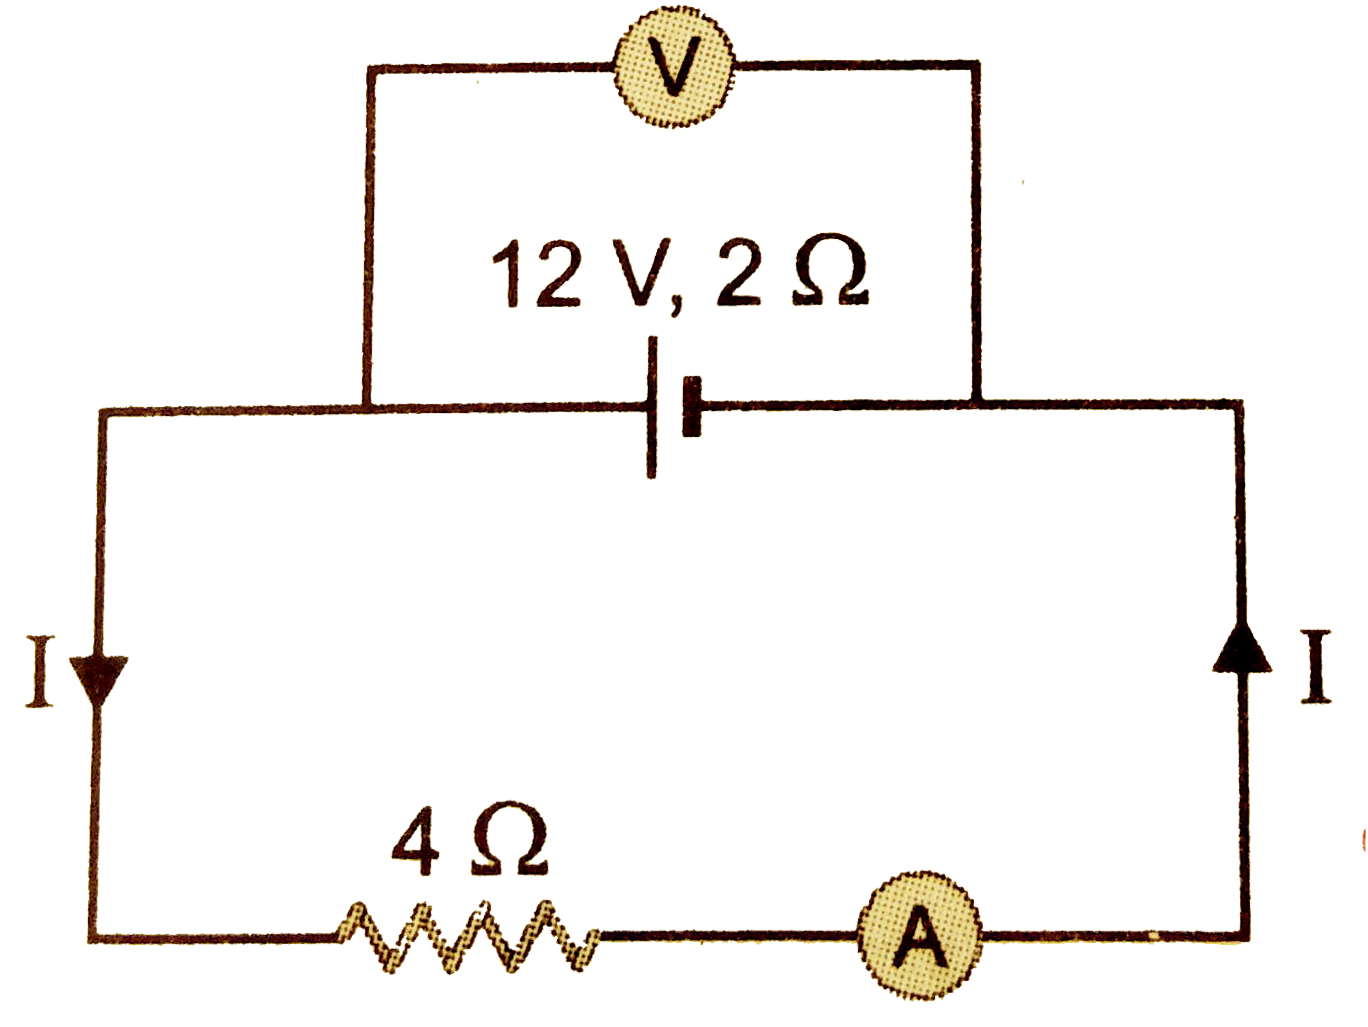 A battery of emf 12V and internal resistance 2 Omega is connected two a 4 Omega resistor. Show that the a voltmeter when placed across cell and across the resistor in turn given the same reading